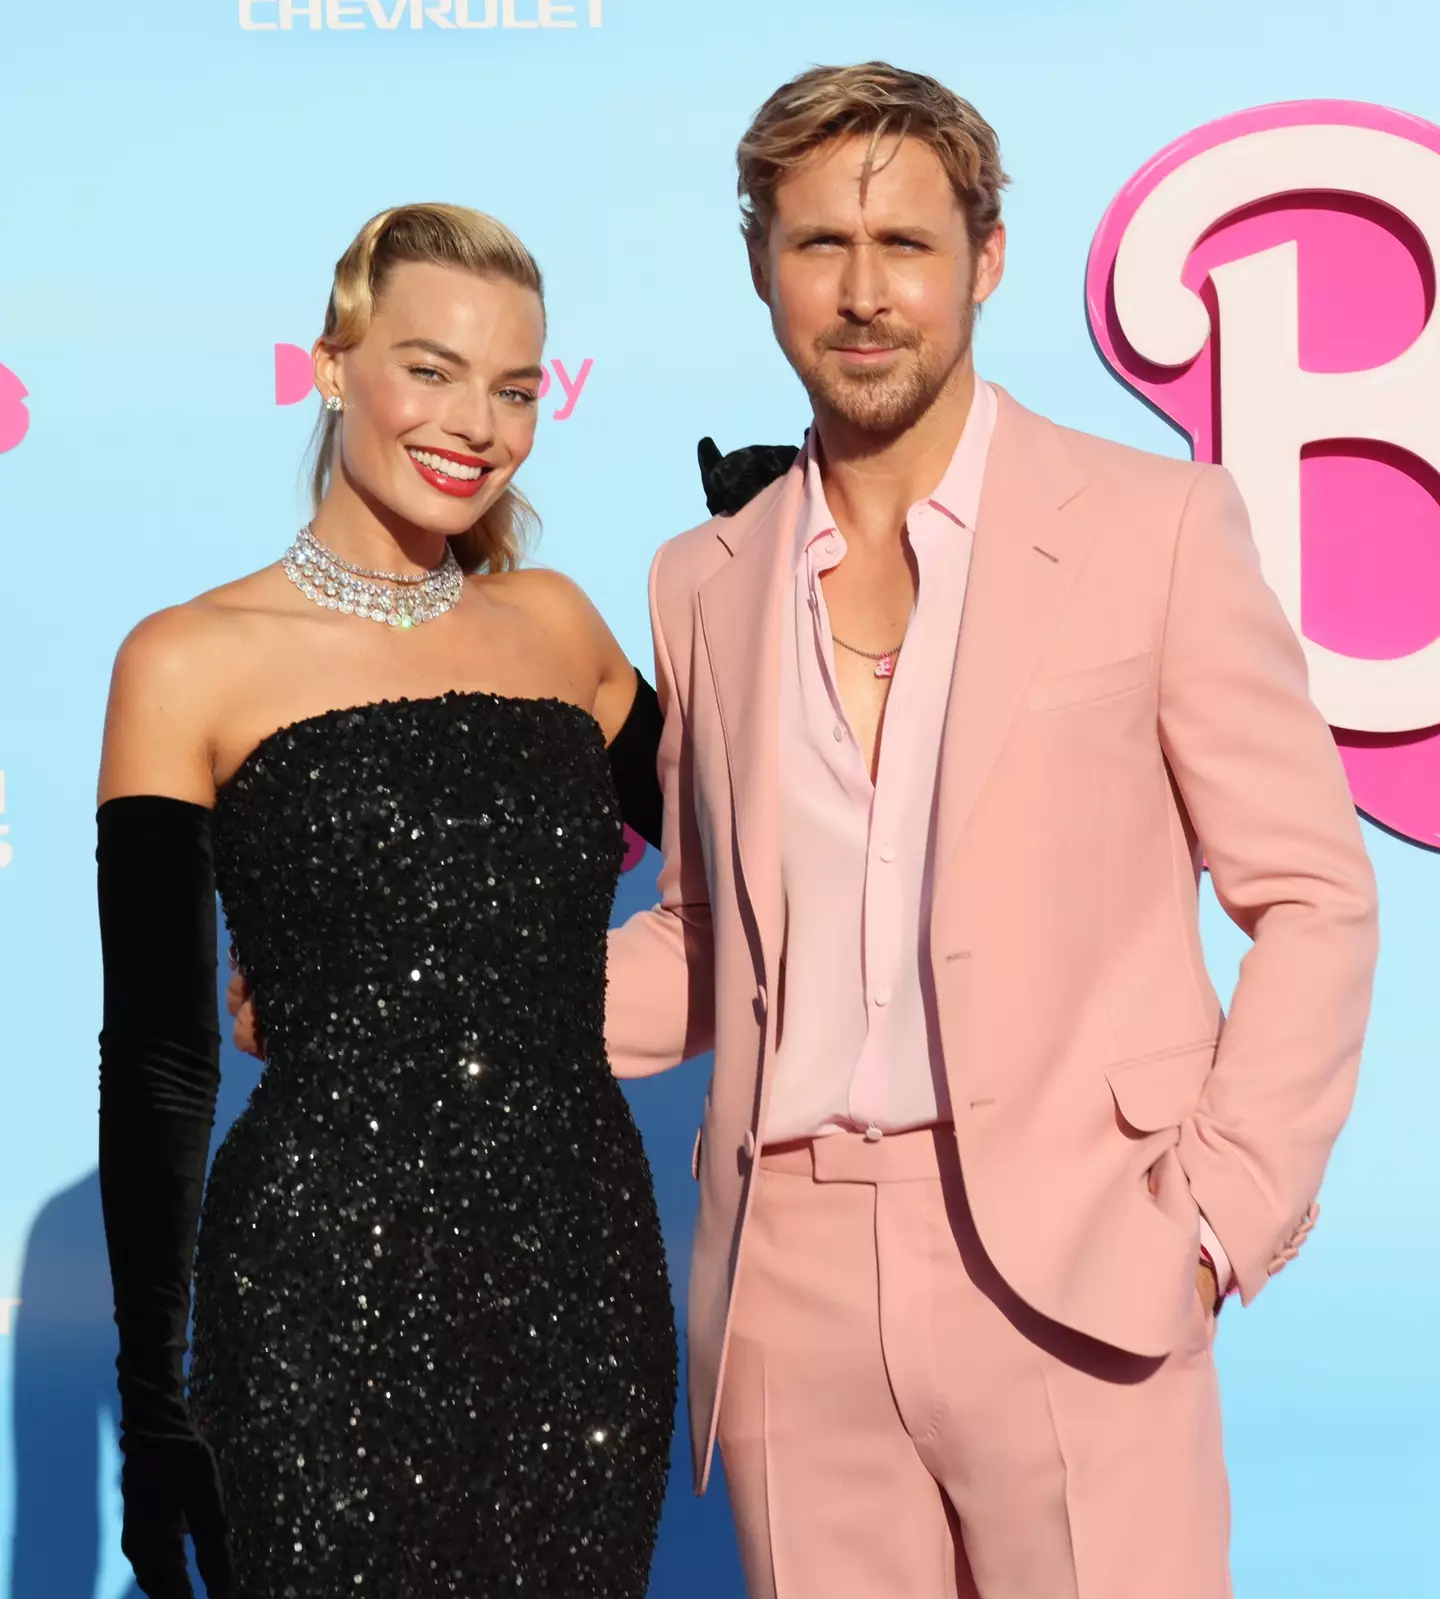 Margot Robbie and Ryan Gosling on the red carpet.